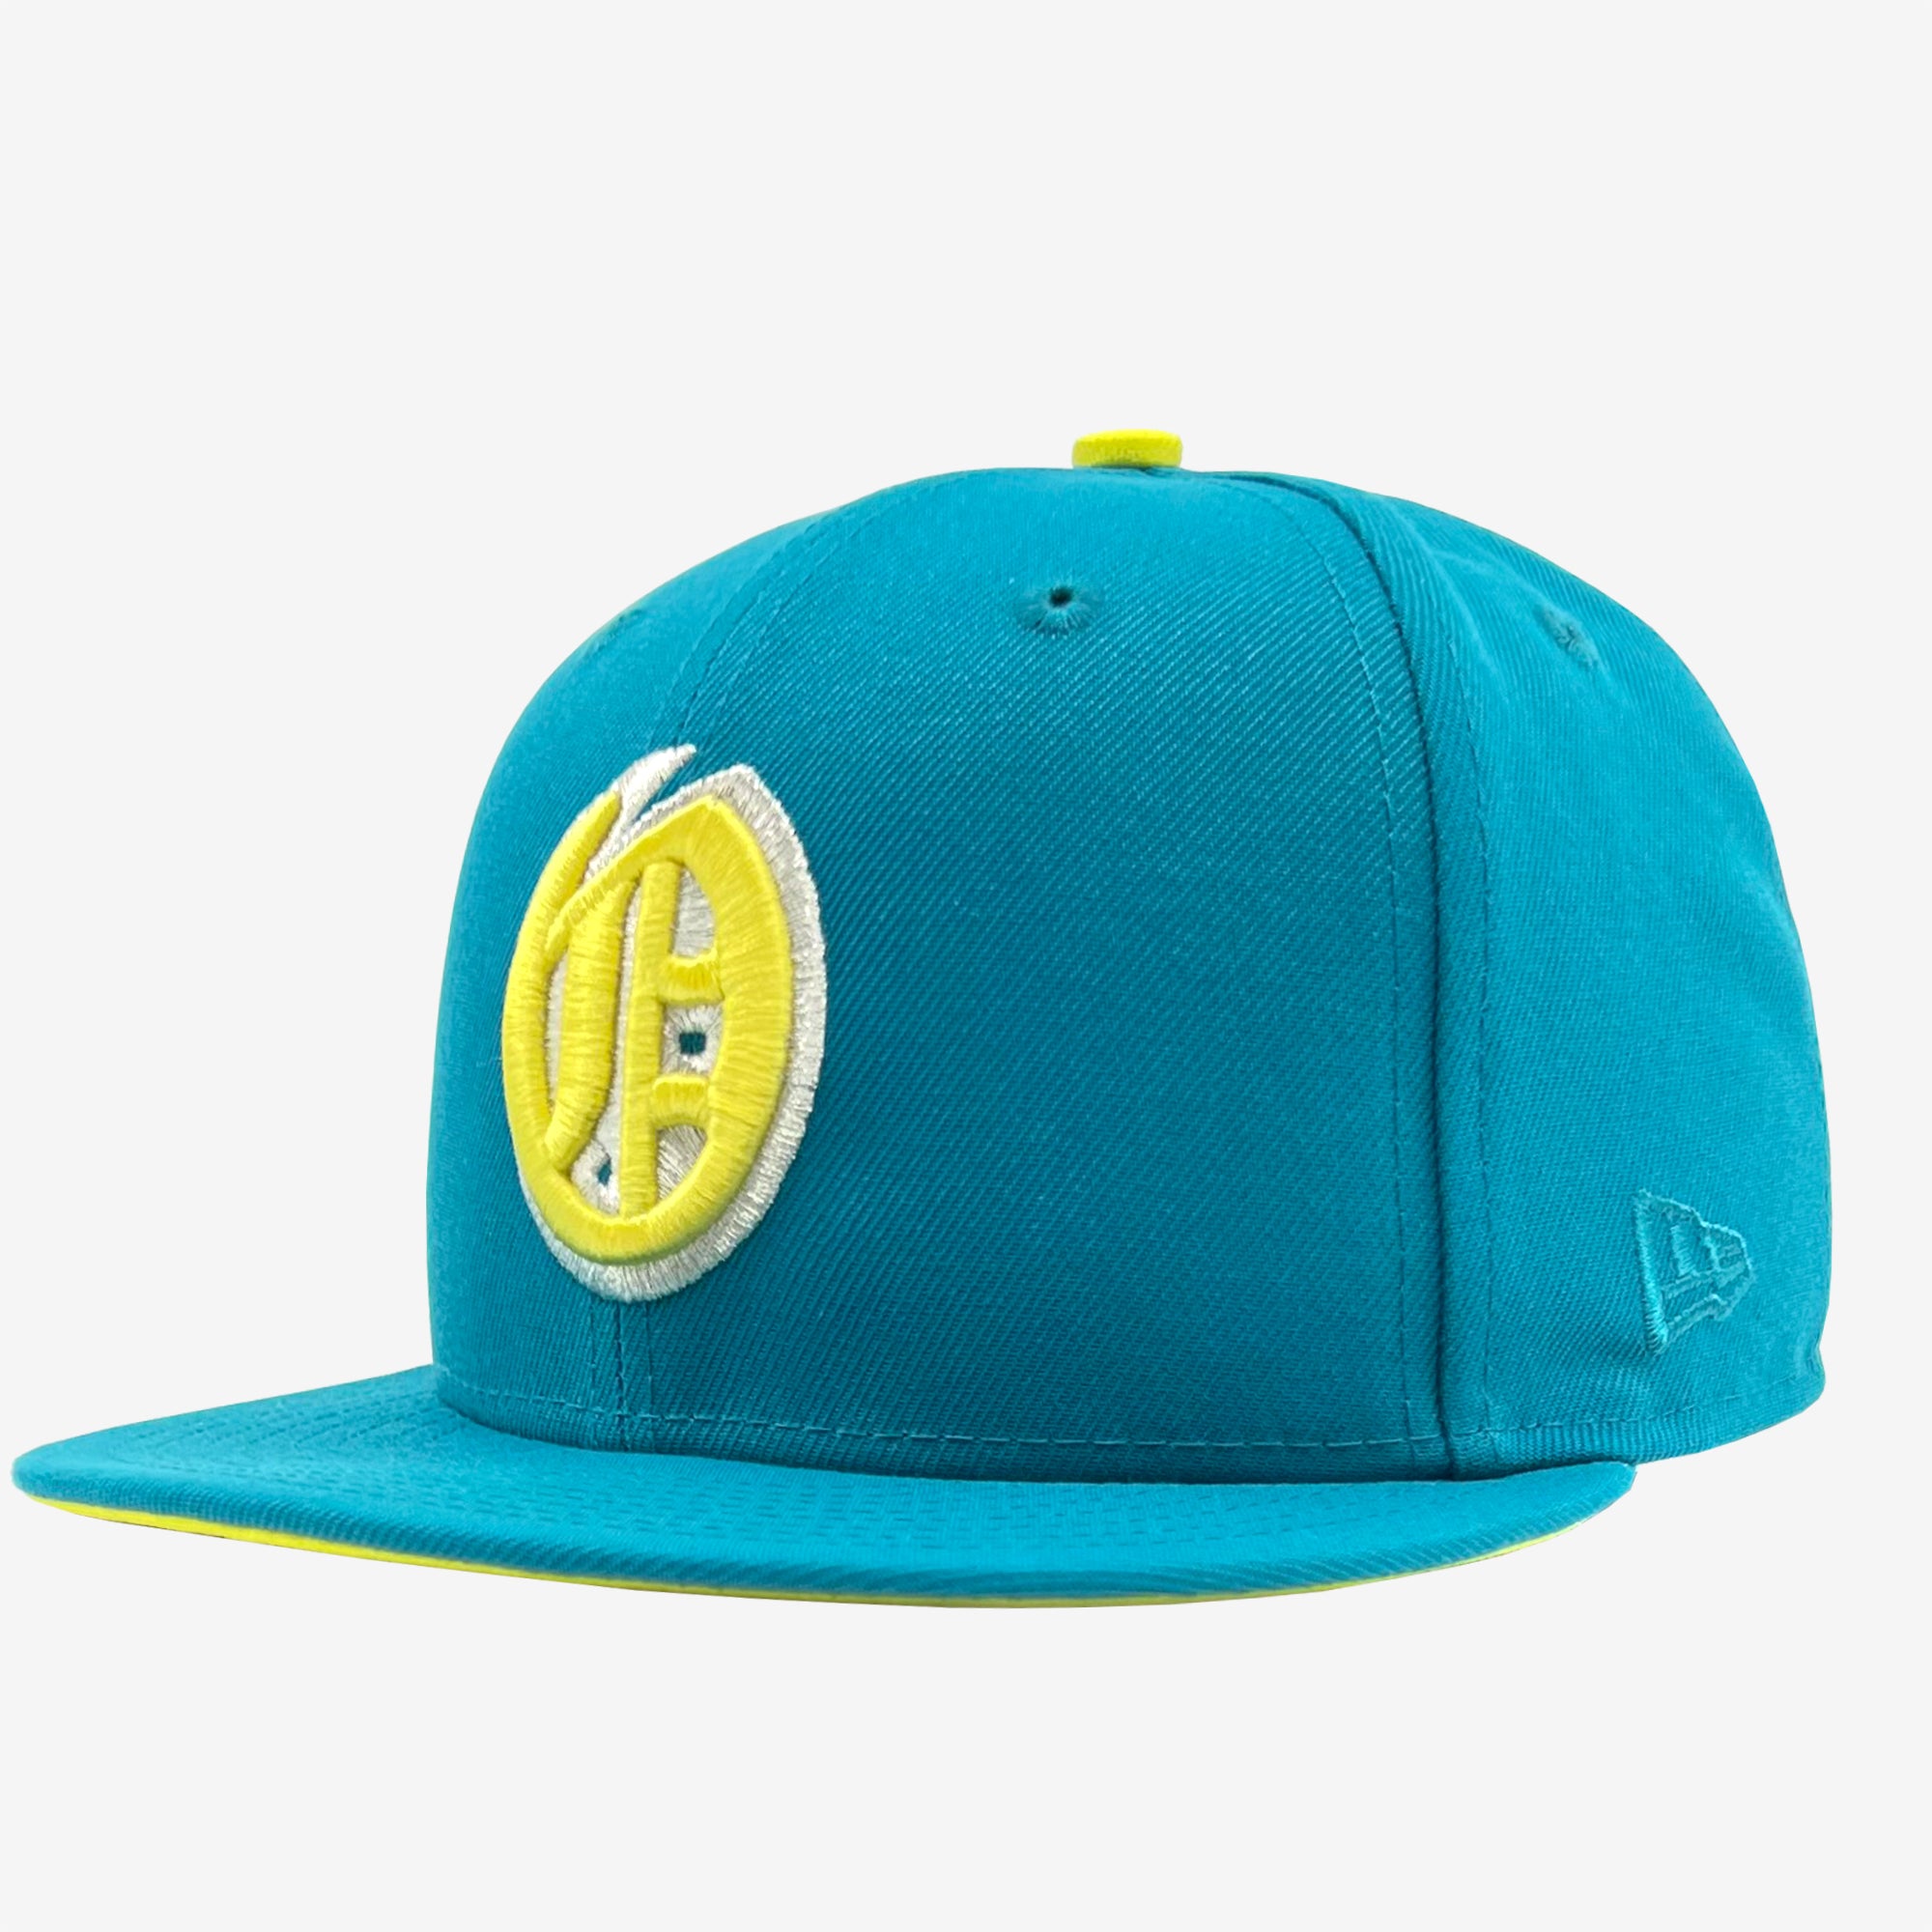 Side view of teal fitted cap with yellow embroidered Oakland Oaks logo on the crown.